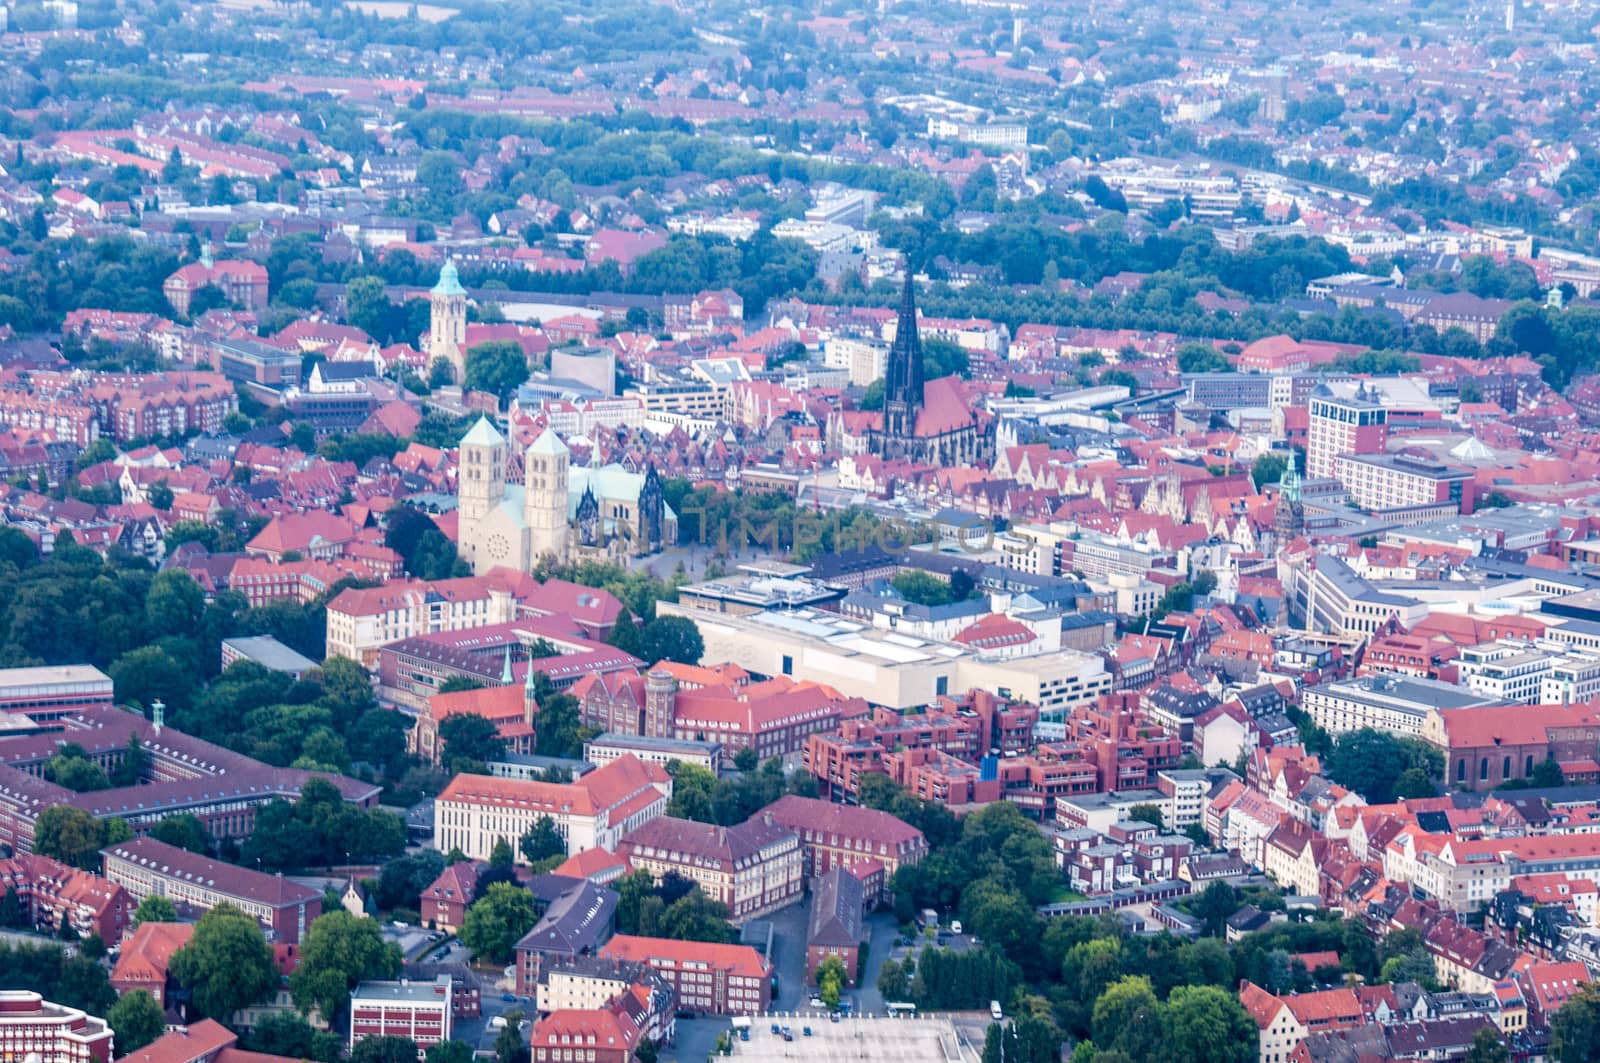 aerial view of the german city Muenster